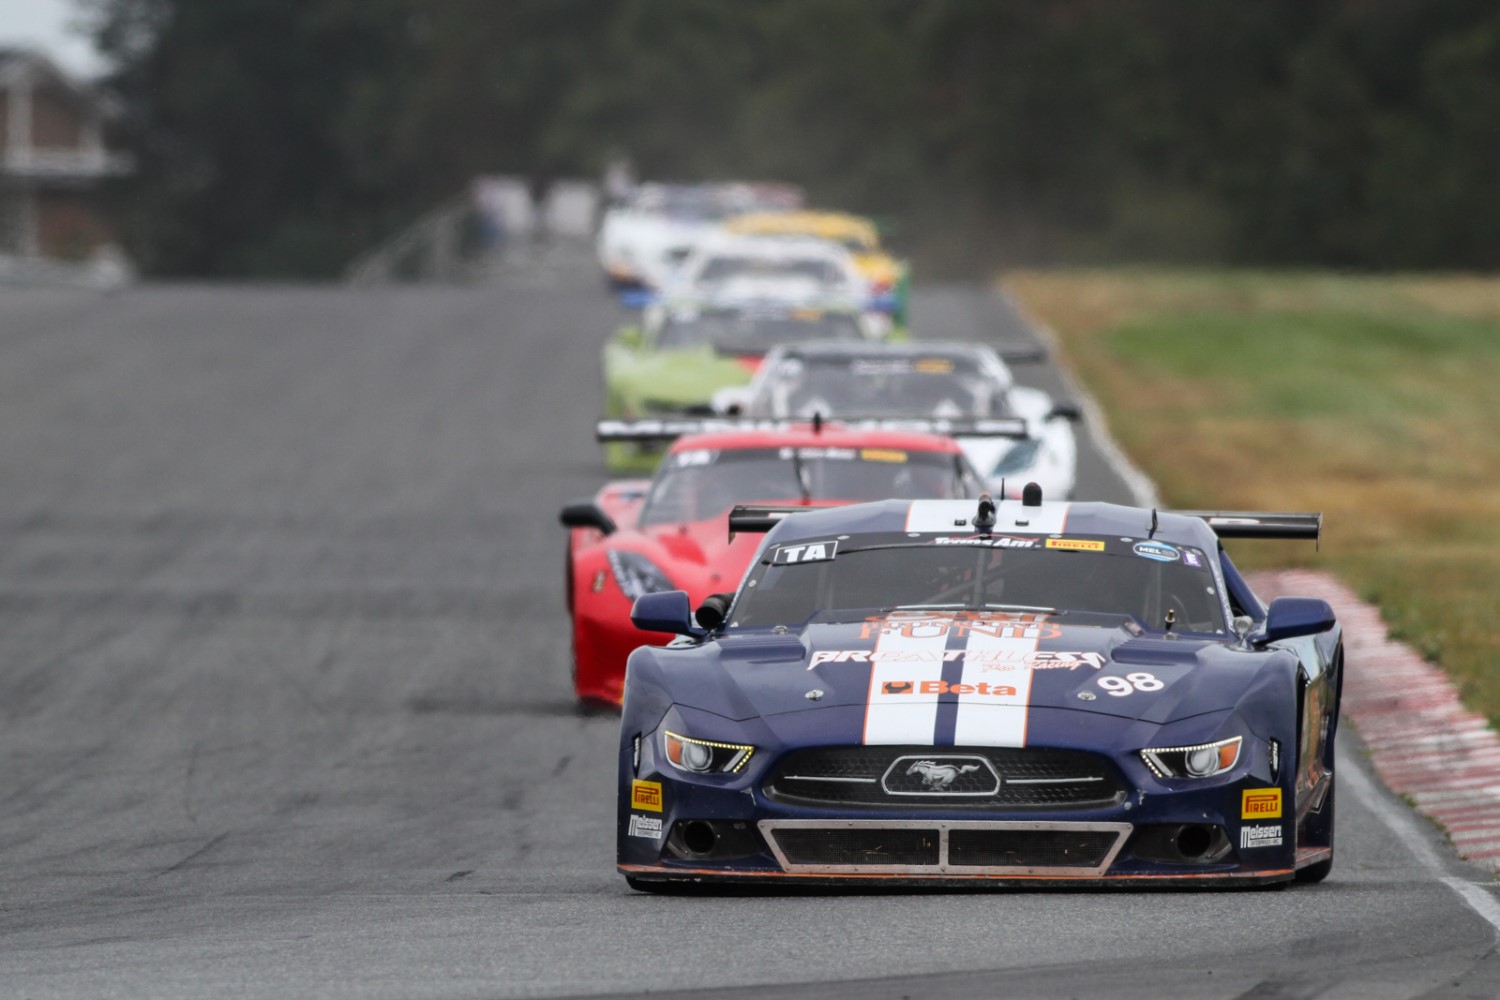 Francis leads at NJ Motorsports Park in 2017